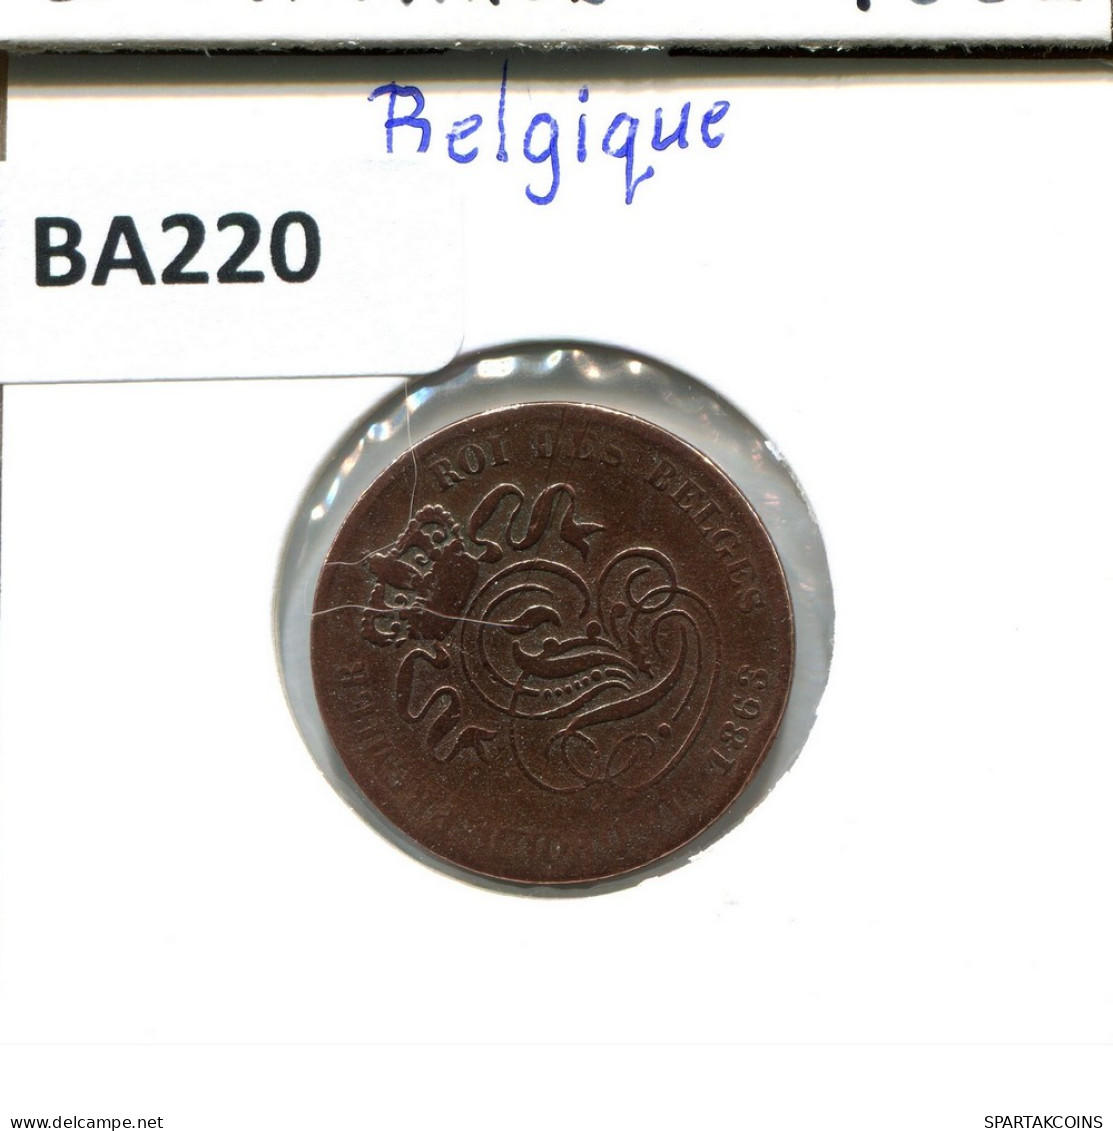 2 CENTIMES 1863 FRENCH Text BELGIUM Coin #BA220.U - 2 Centimes